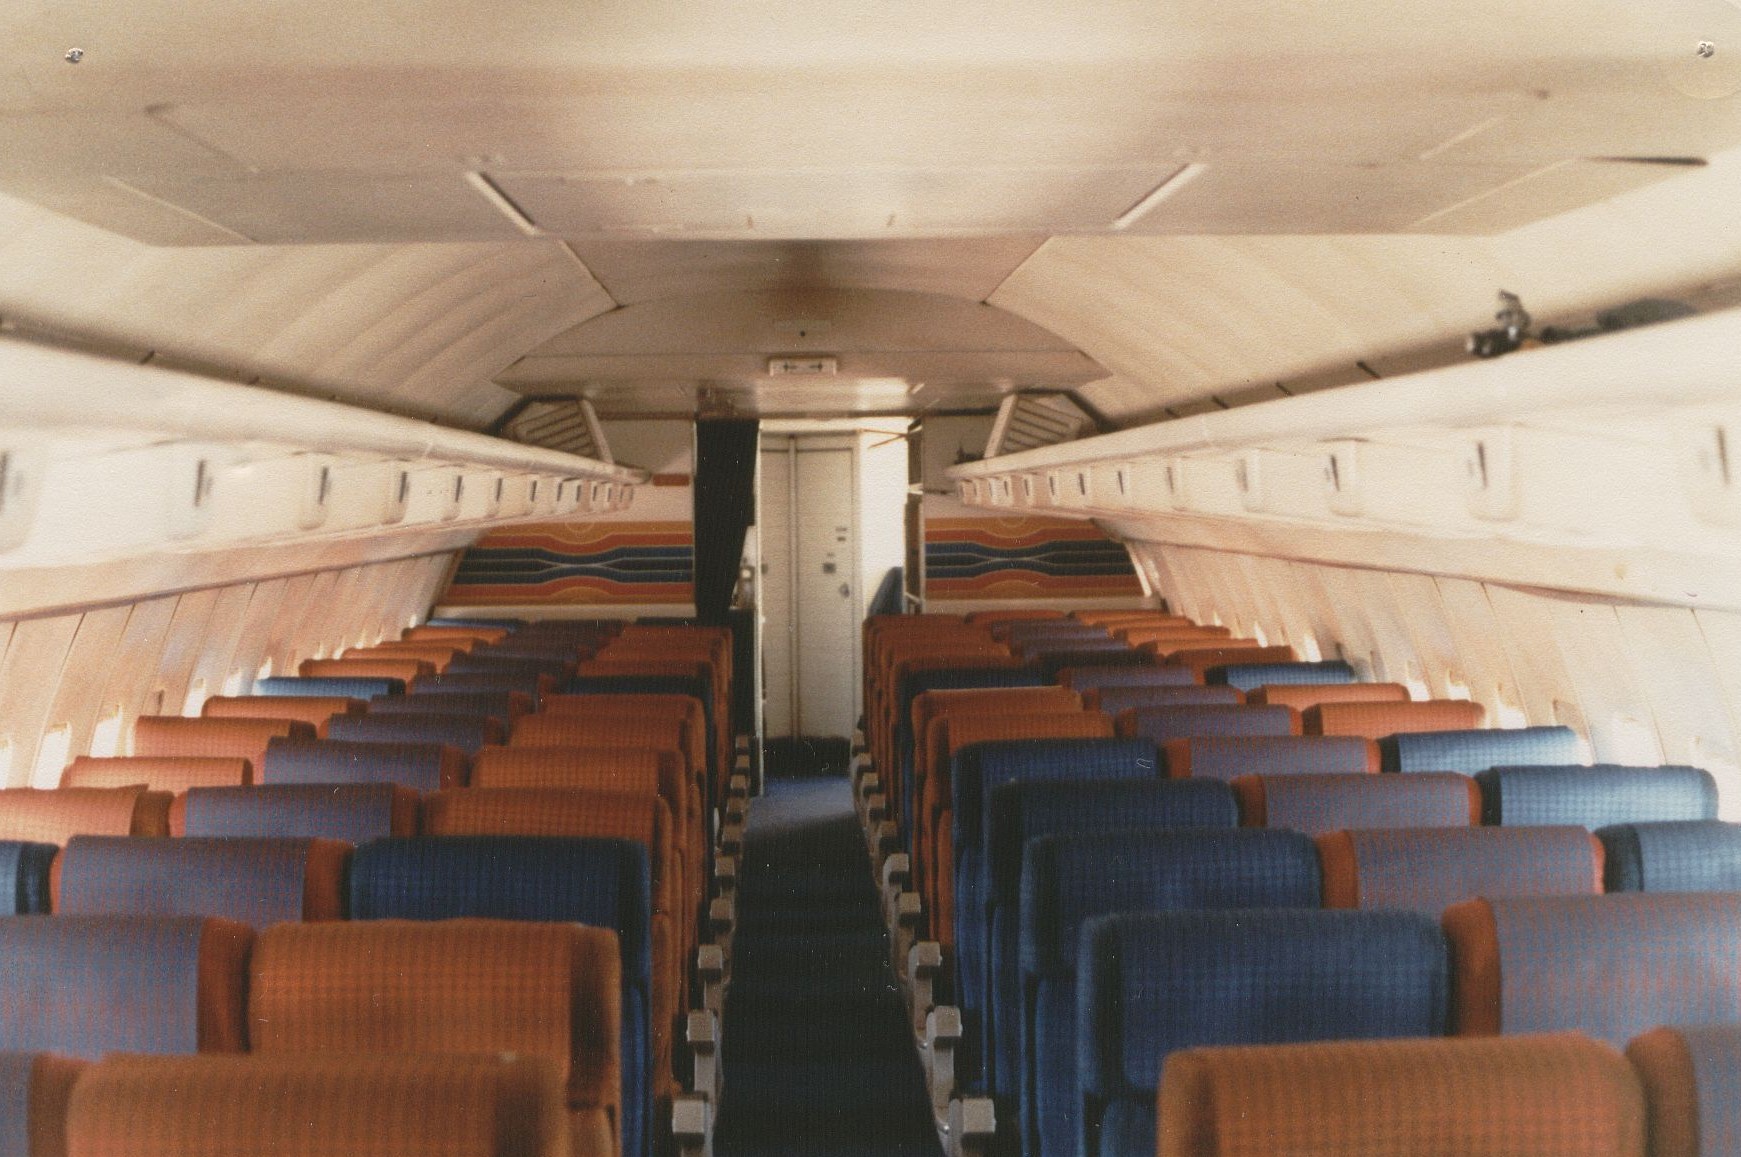 August 1981 The rear section of the cabin of a Pan Am Boeing 707 in an all economy configuration with 180 seats.